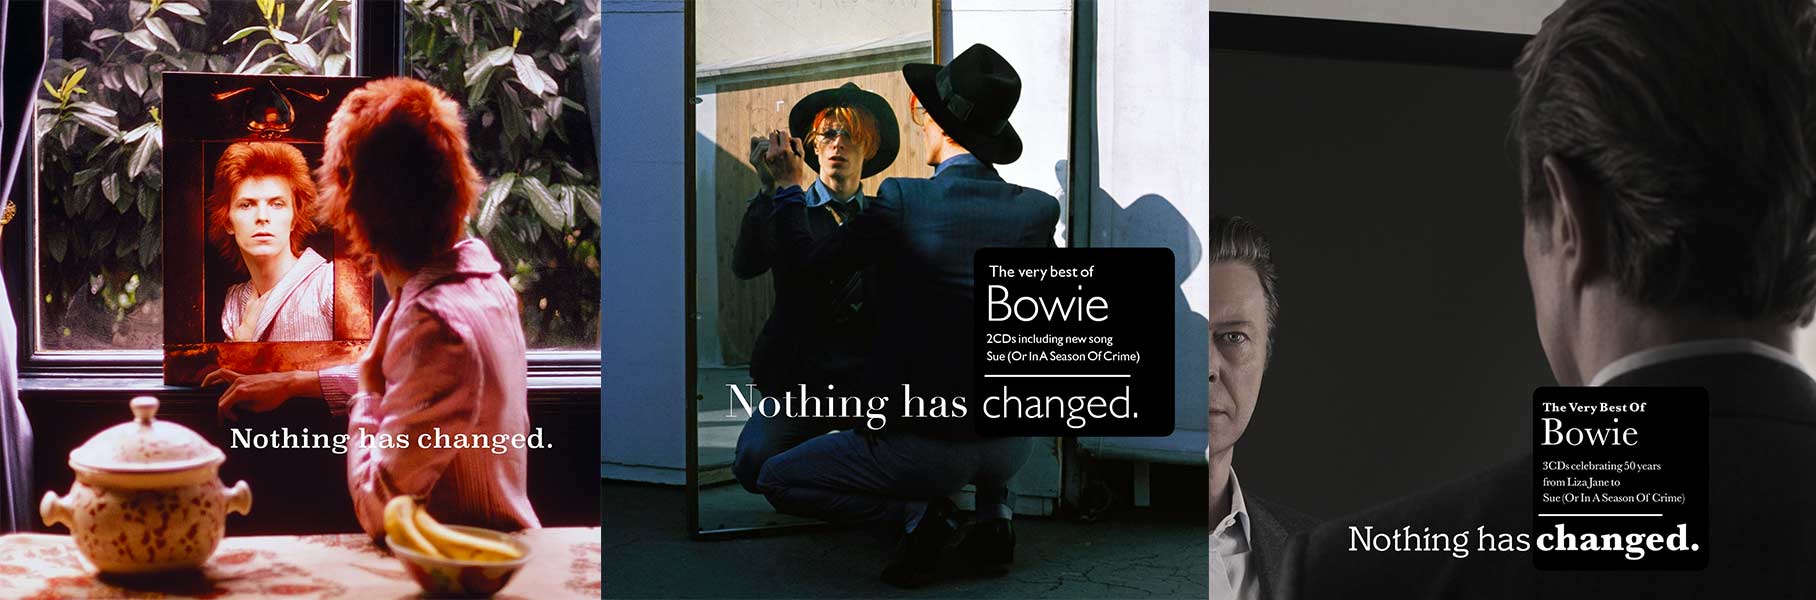 Image result for david bowie nothing has changed